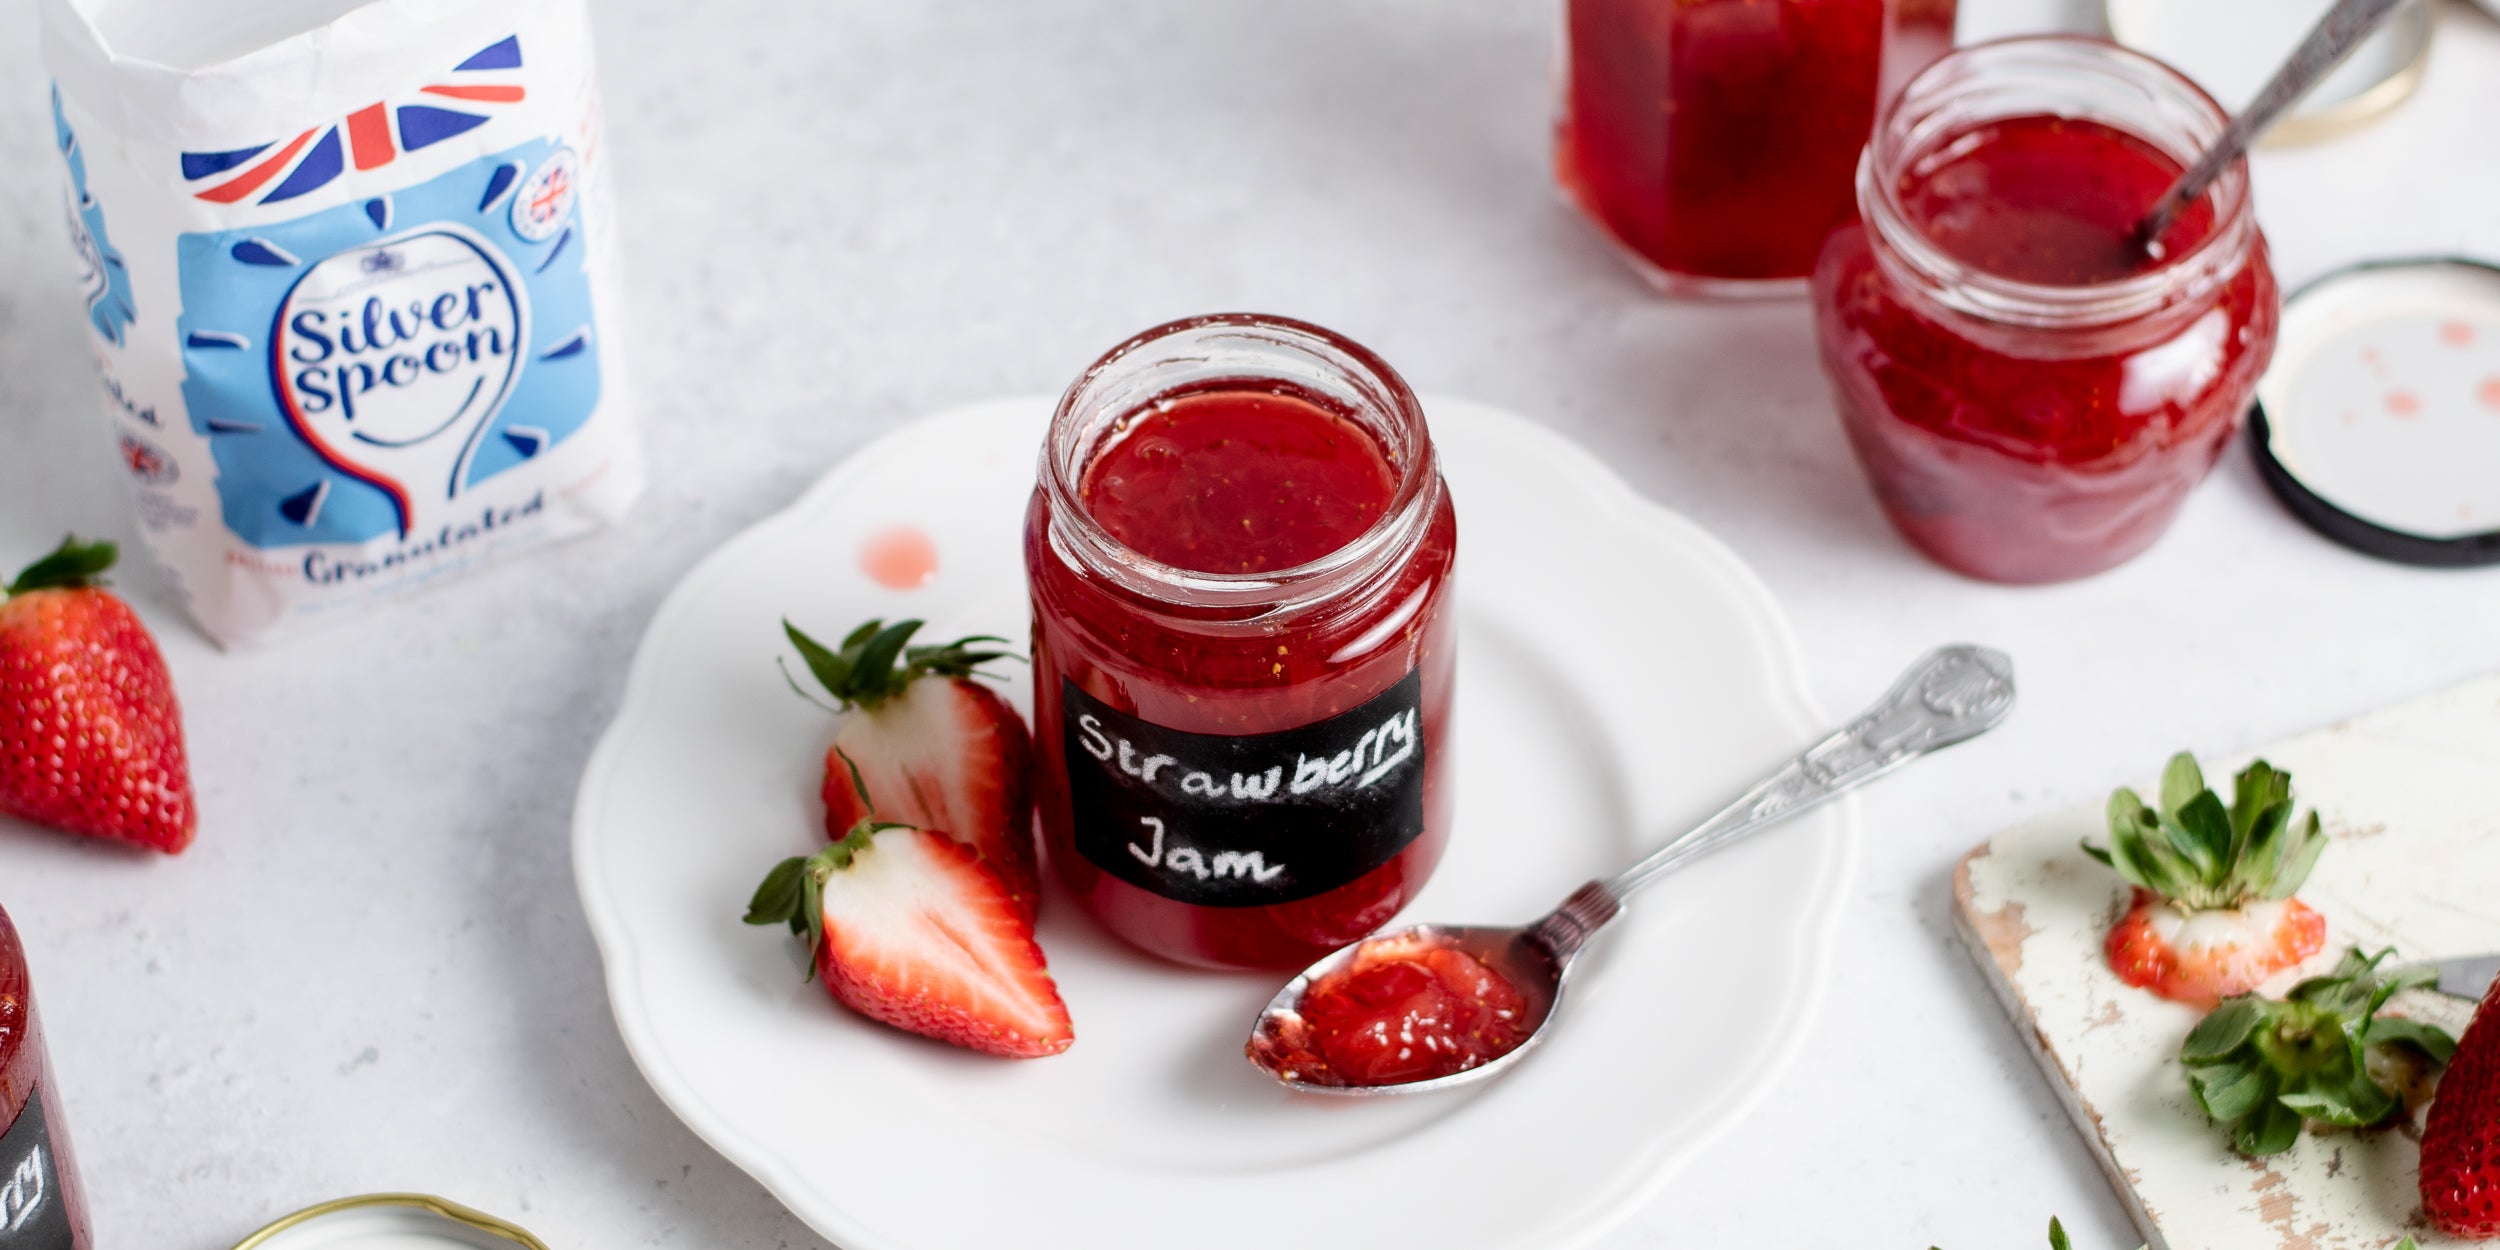 Strawberry Jam in a jam jar, with a spoon with a spoonful and sliced strawberries. Pack of Silver Spoon Granulated Sugar in the background